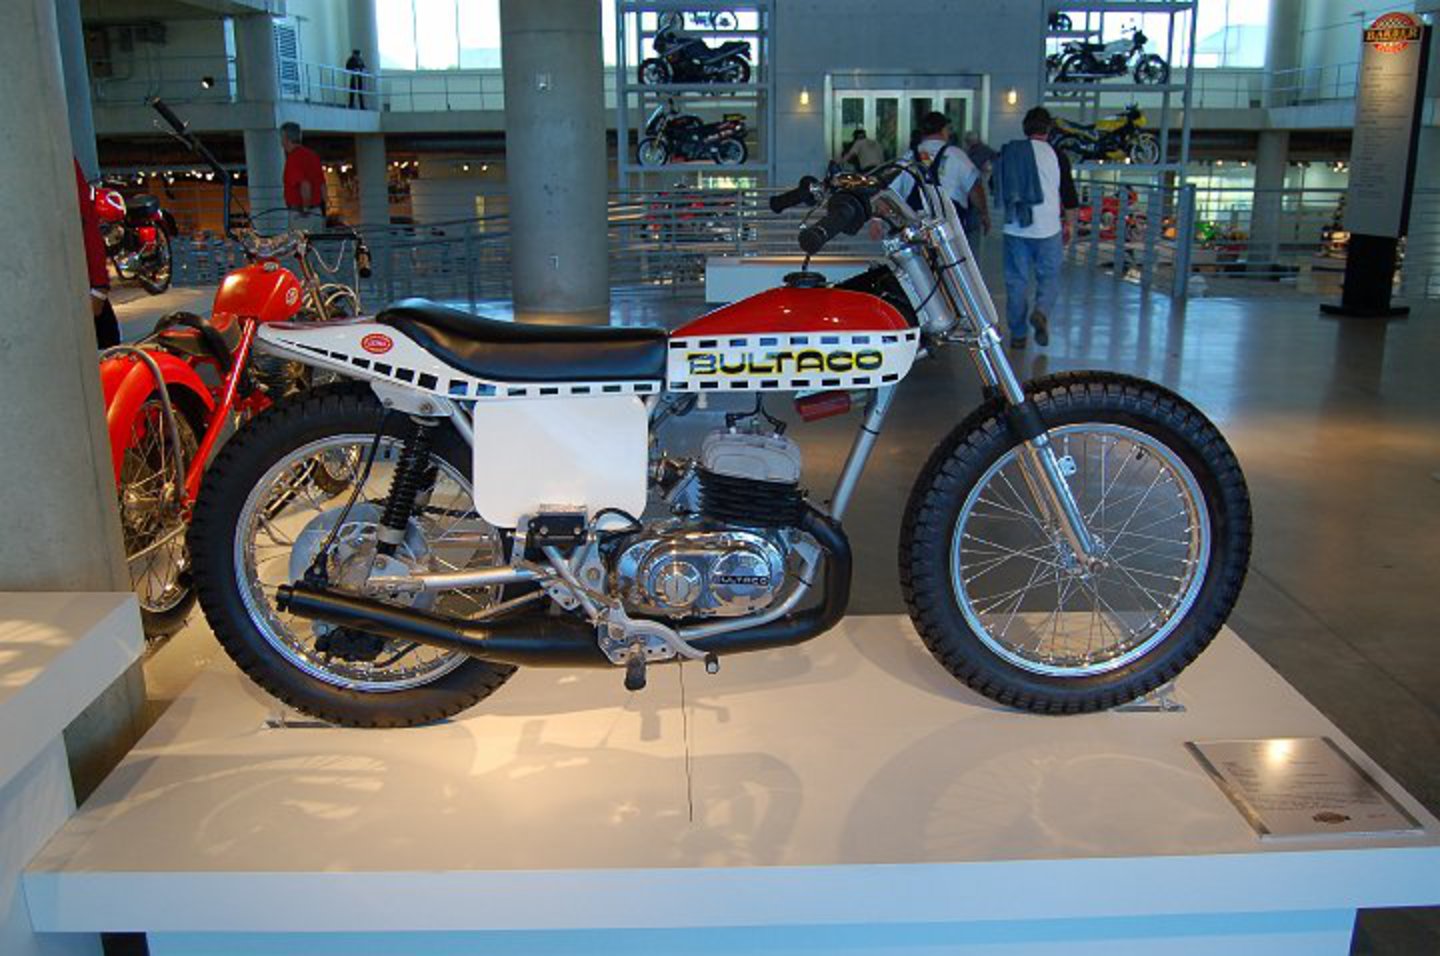 Bultaco Frontera: Best Images Collection of Bultaco Frontera